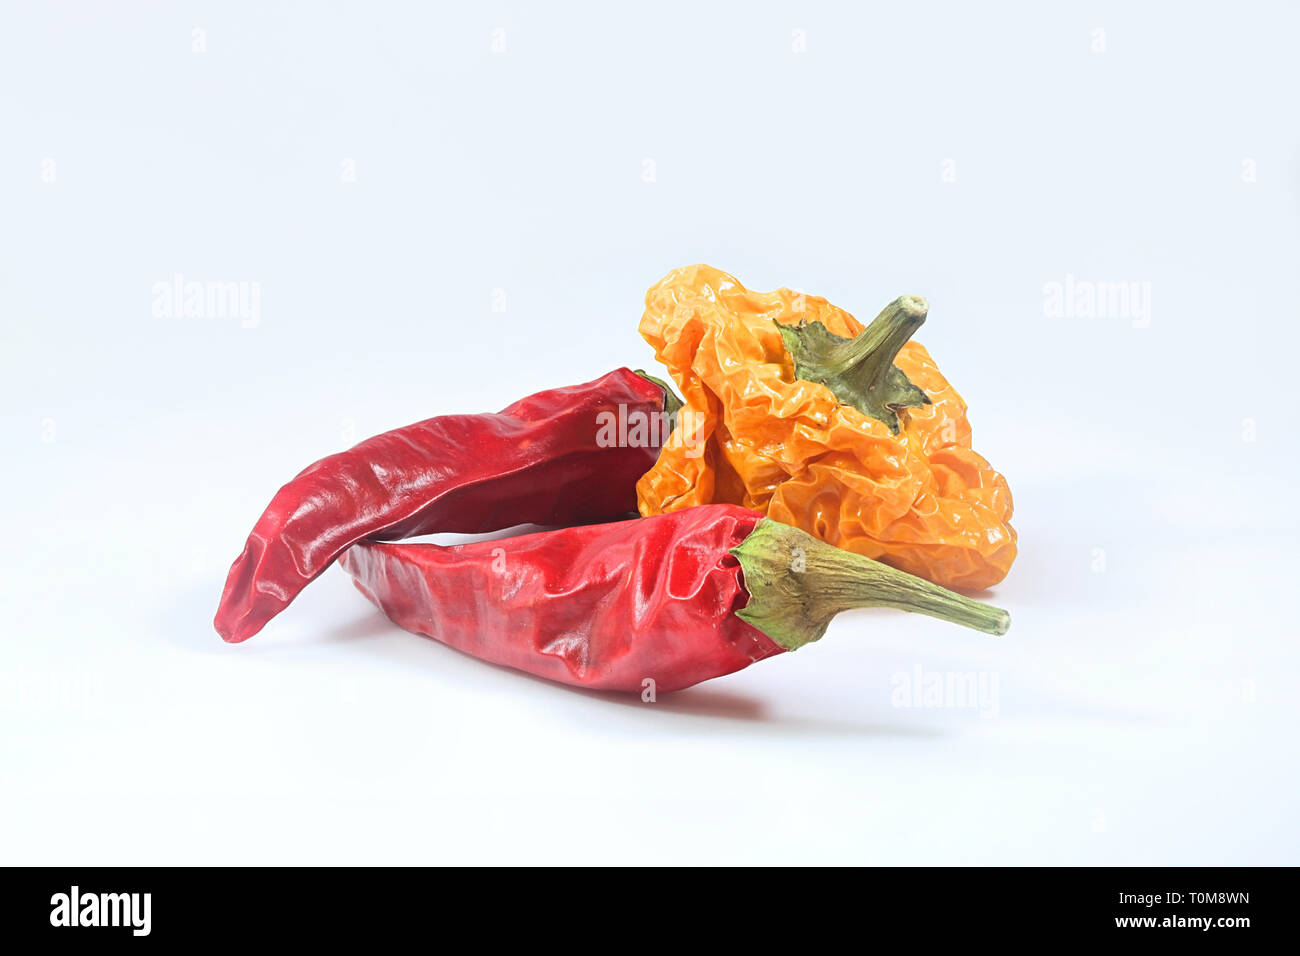 Red chili peppers and yellow habanero on white background Stock Photo